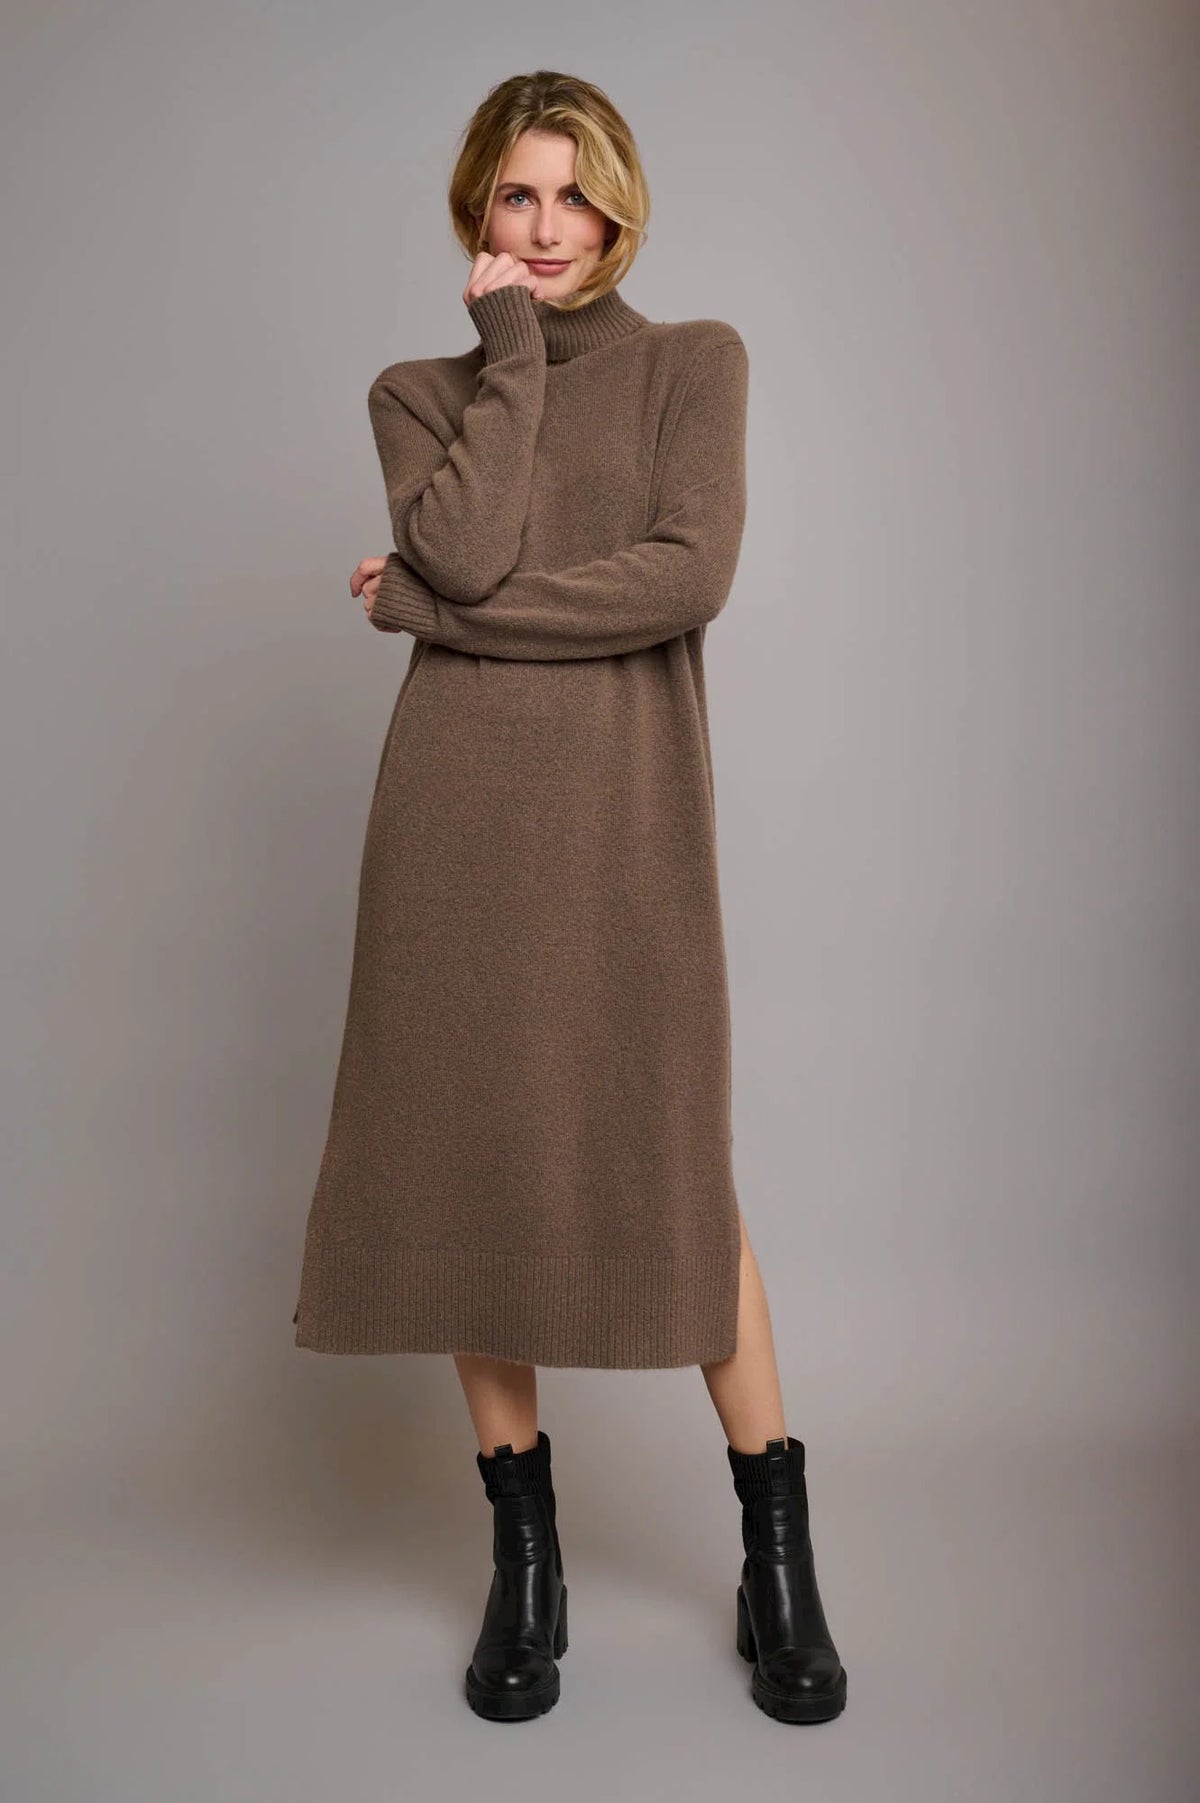 Dark taupe knitted long dress with long sleeves and a high roll neck